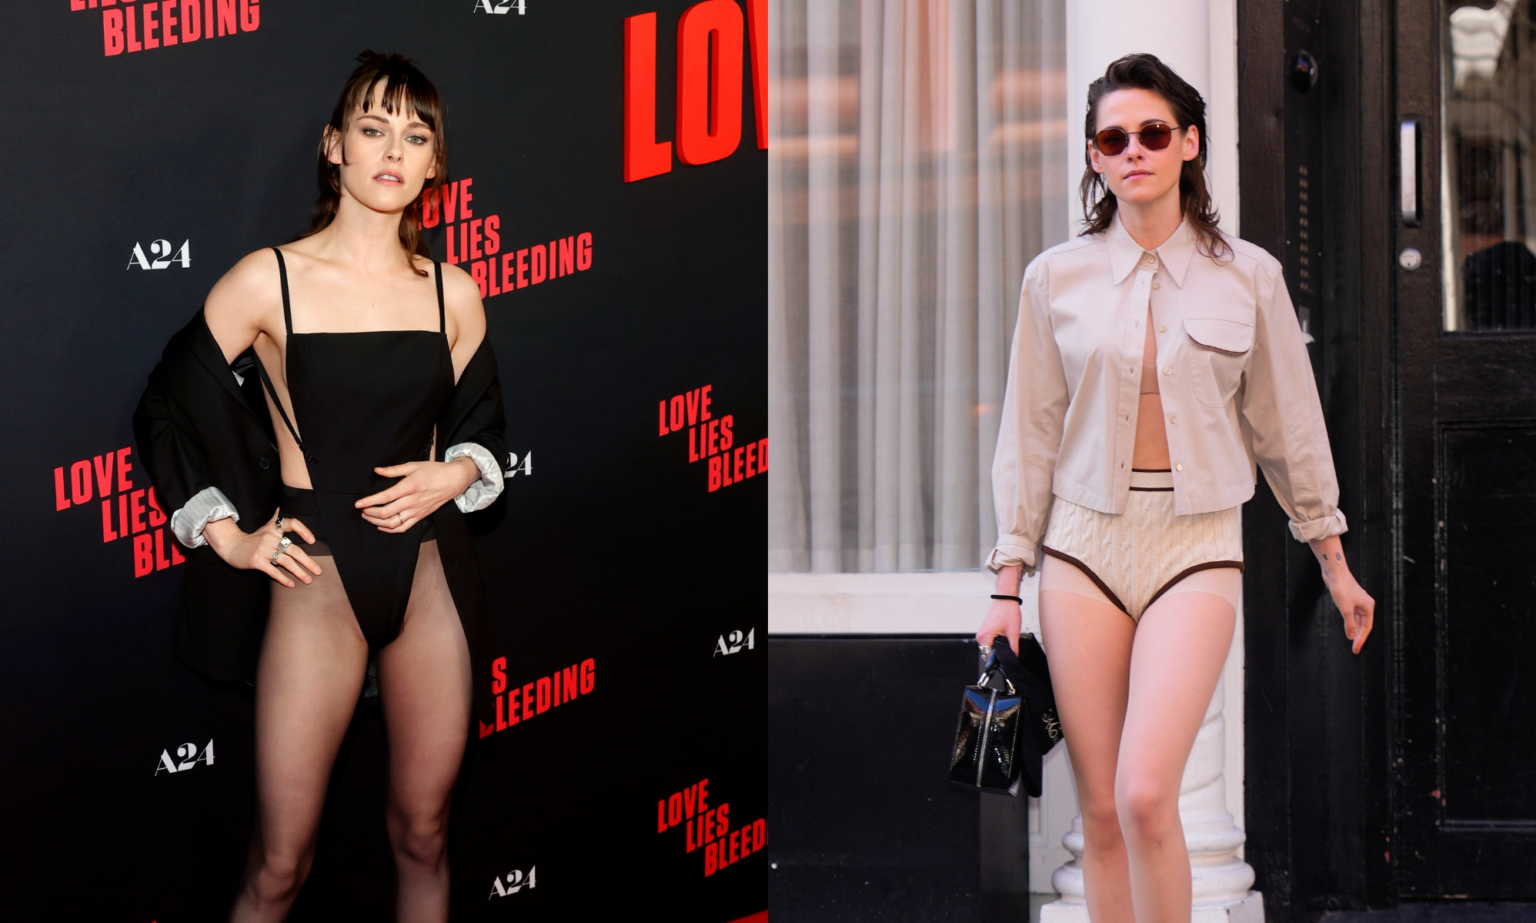 Why is Kristen Stewart going bottomless? Everything you need to know about the ‘No Pants’ trend